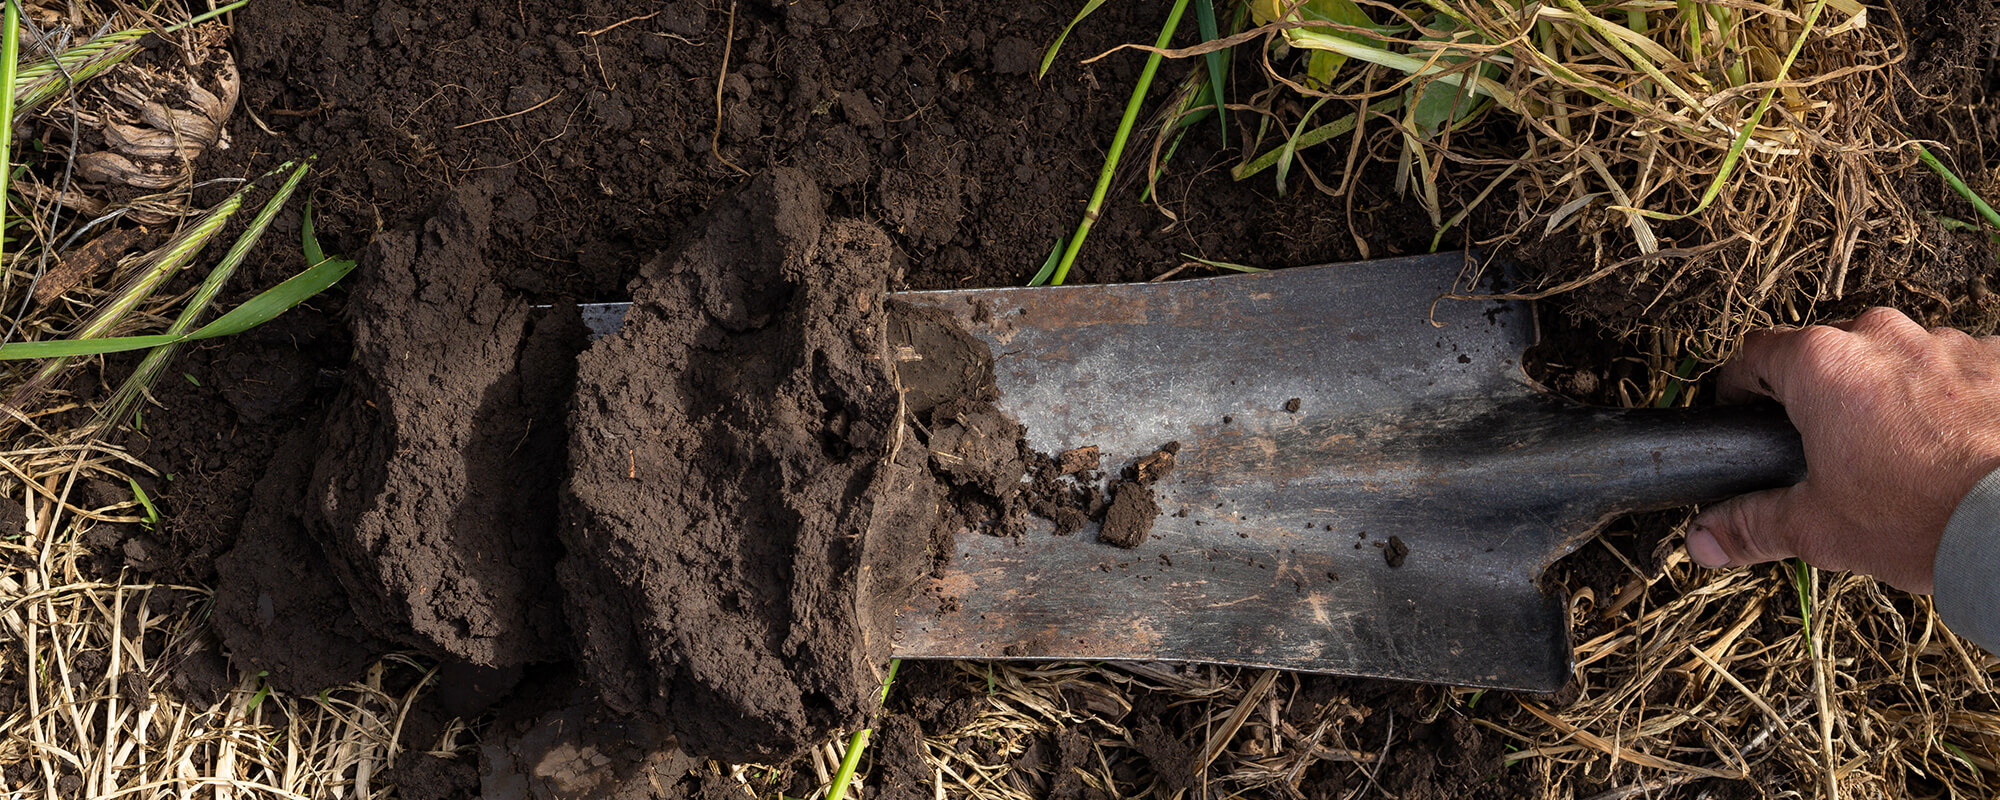 The Fundamental Principles of Regenerative Agriculture and Soil Health